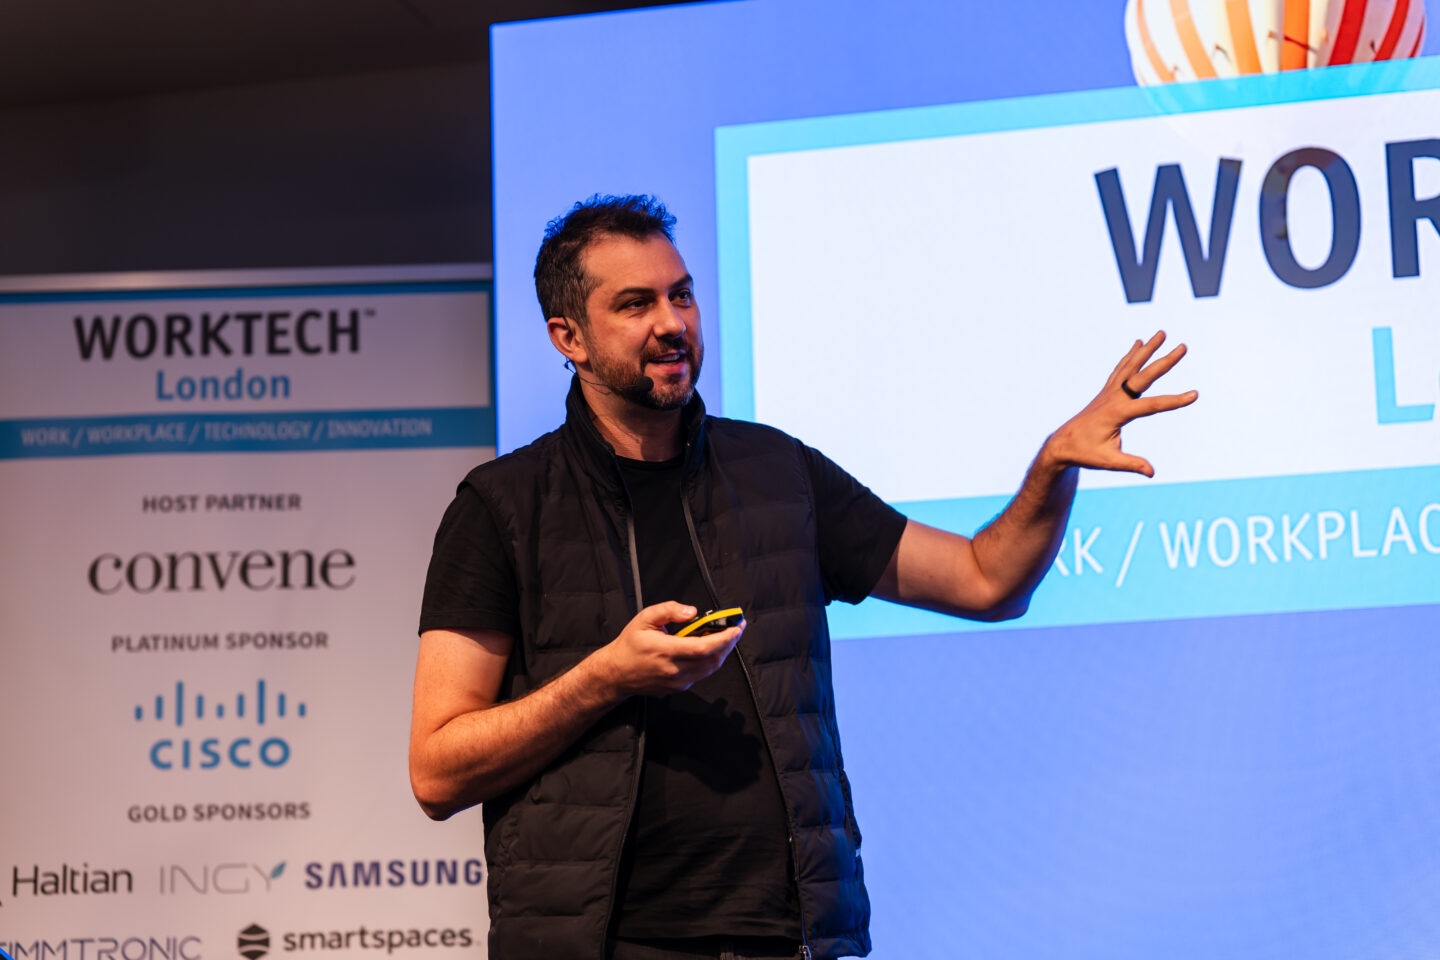 Daniel Hulme speaking on stage at a WORKTECH conference